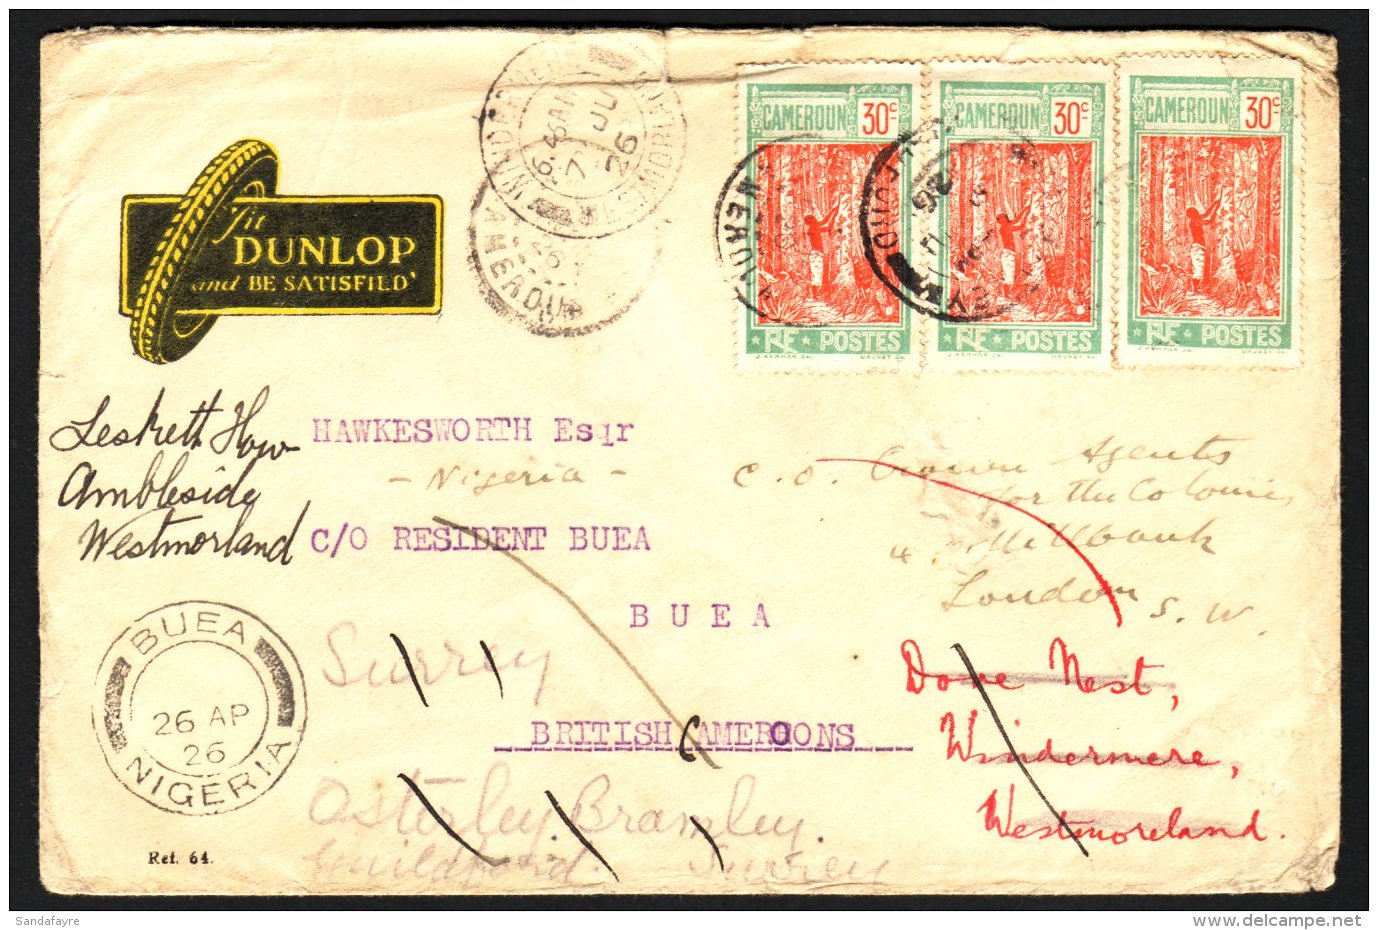 BRITISH CAMEROONS 1928 "Dunlop" Advertising Cover Sent From French Cameroon To Buea And Thence Forwarded Around... - Nigeria (...-1960)